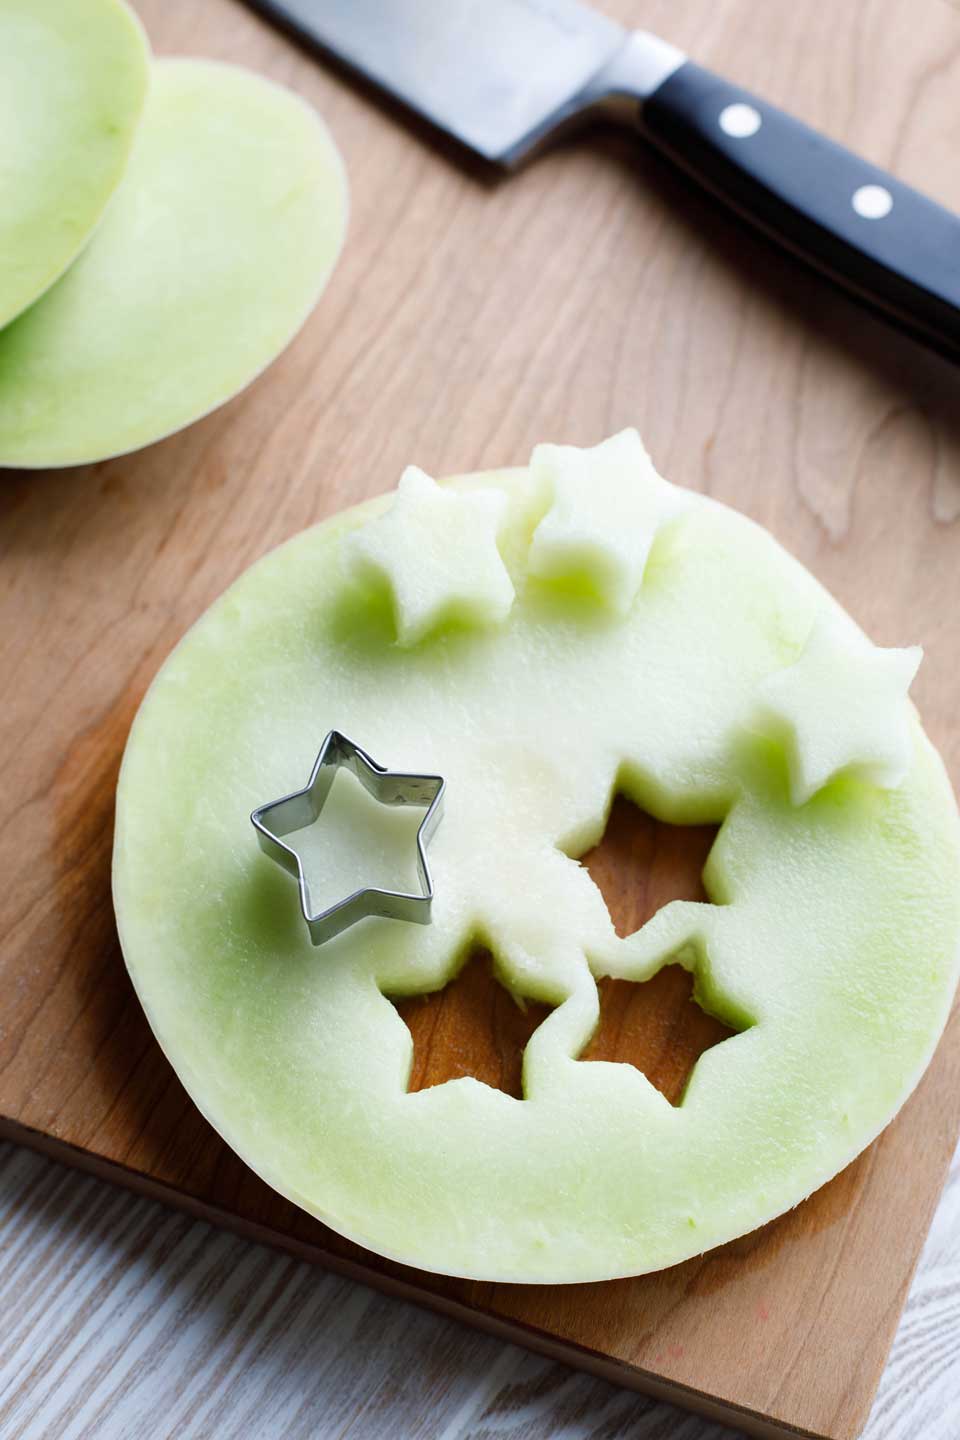 Slice of honeydew melon on a cutting board, with a small star-shaped cookie cutter making little melon stars to decorate the fruit salad